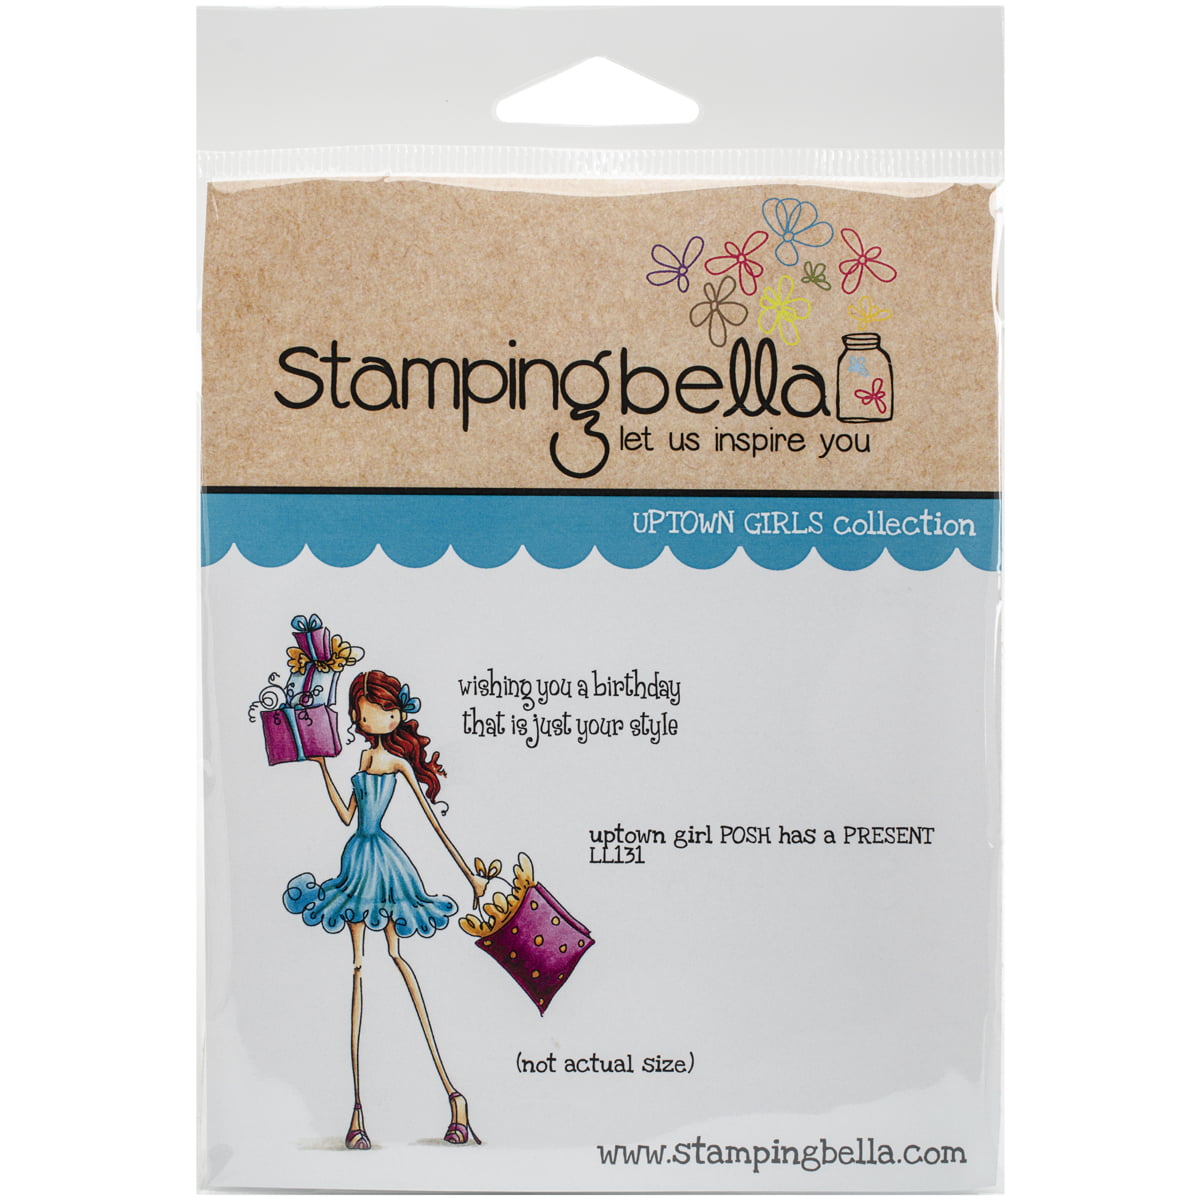 6.5 x 4.5 Stamping Bella Uptown Girl Posh Has A Present Cling Rubber Stamp